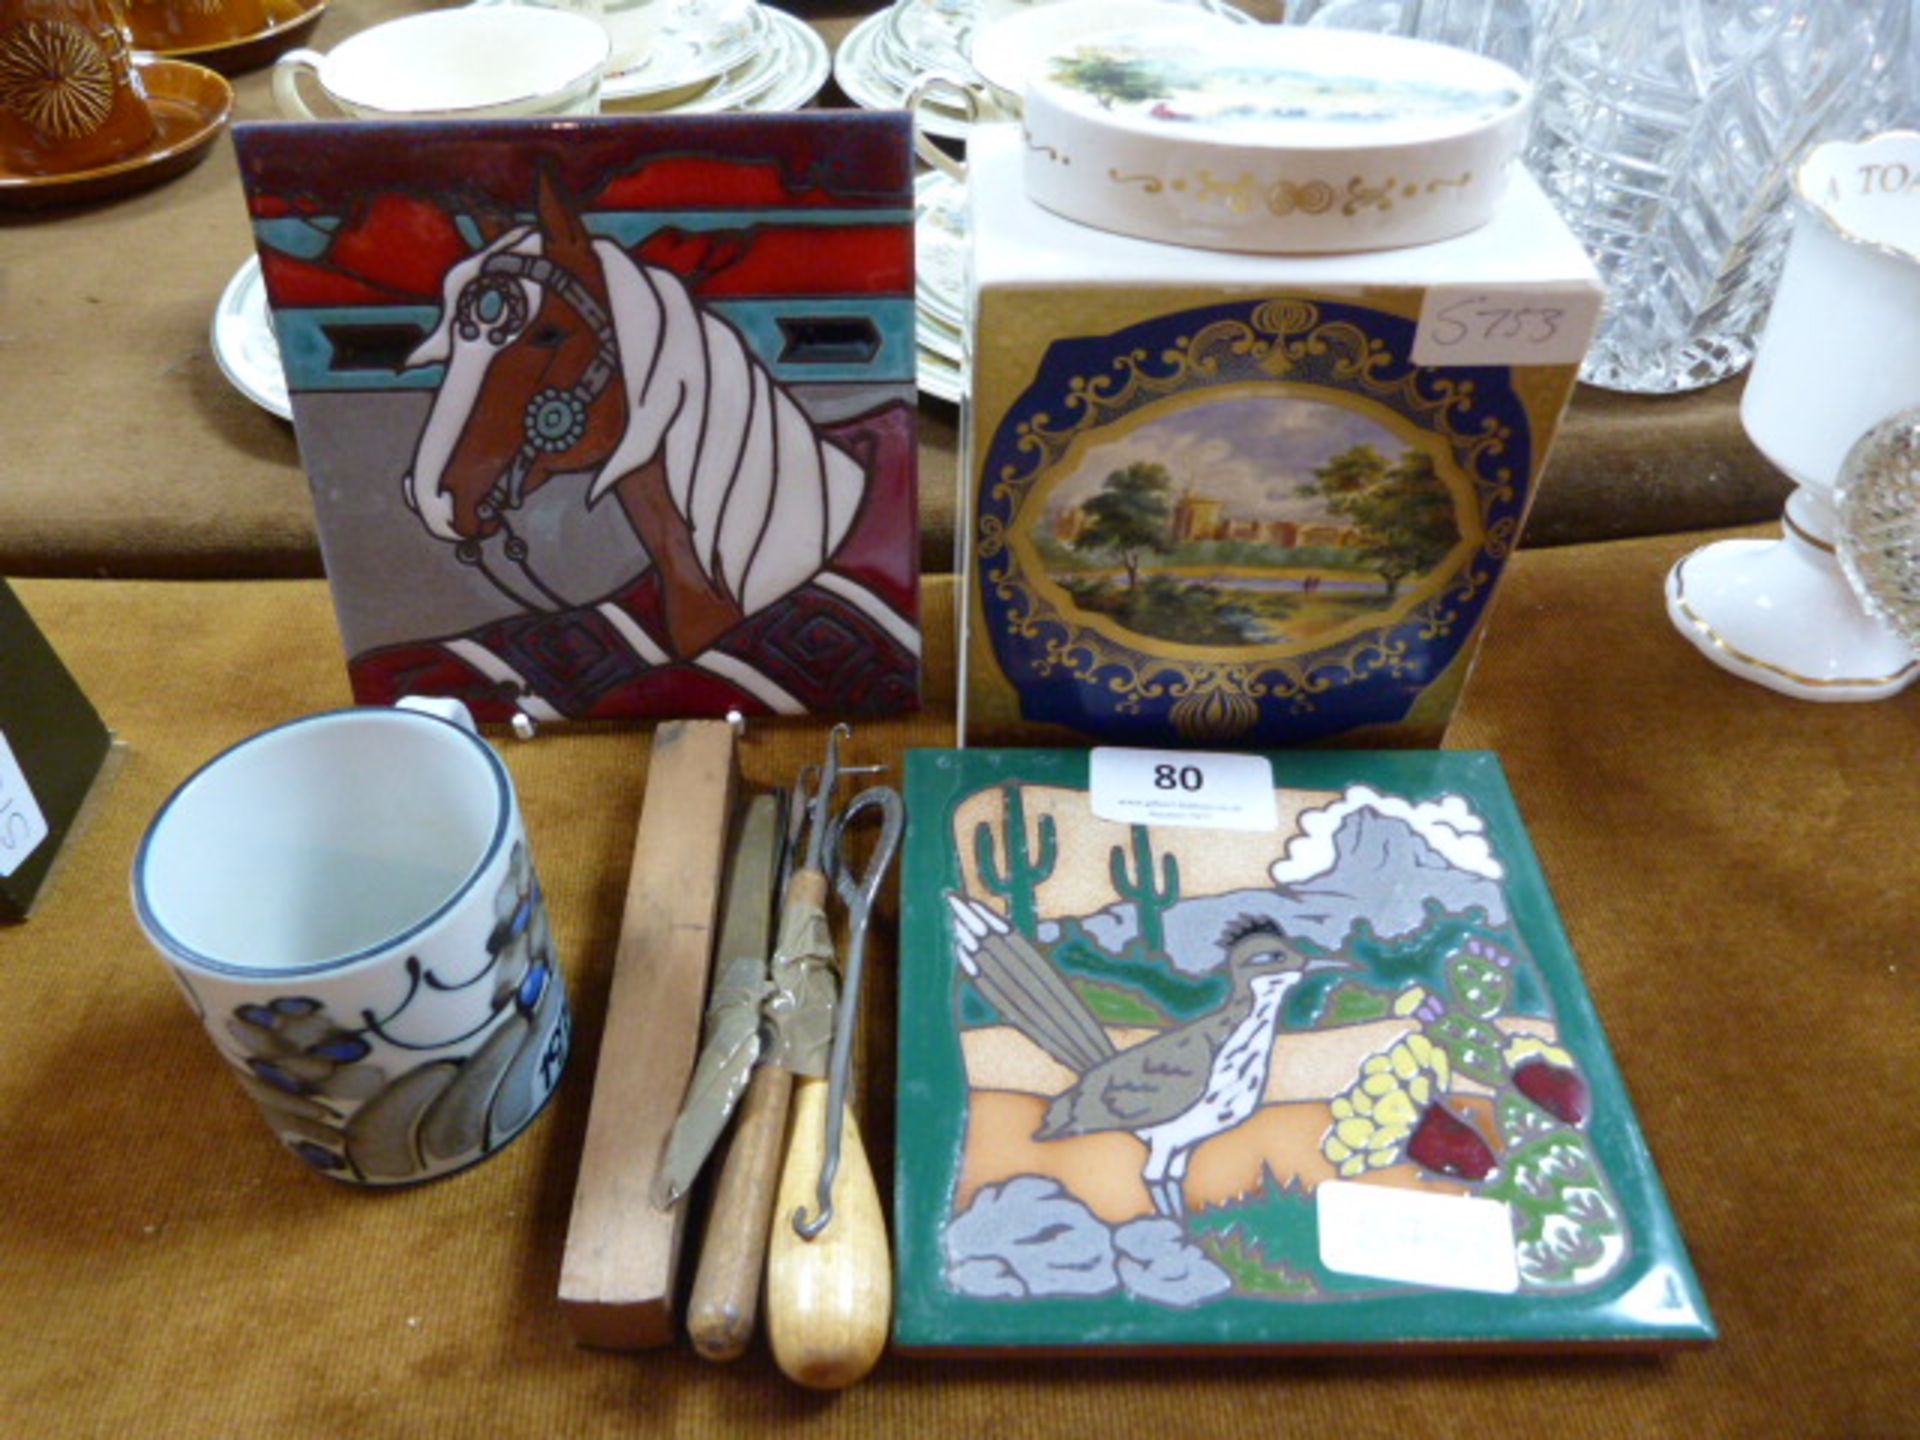 Two Decorative Tiles, Ginger Jar and a Royal Cauld